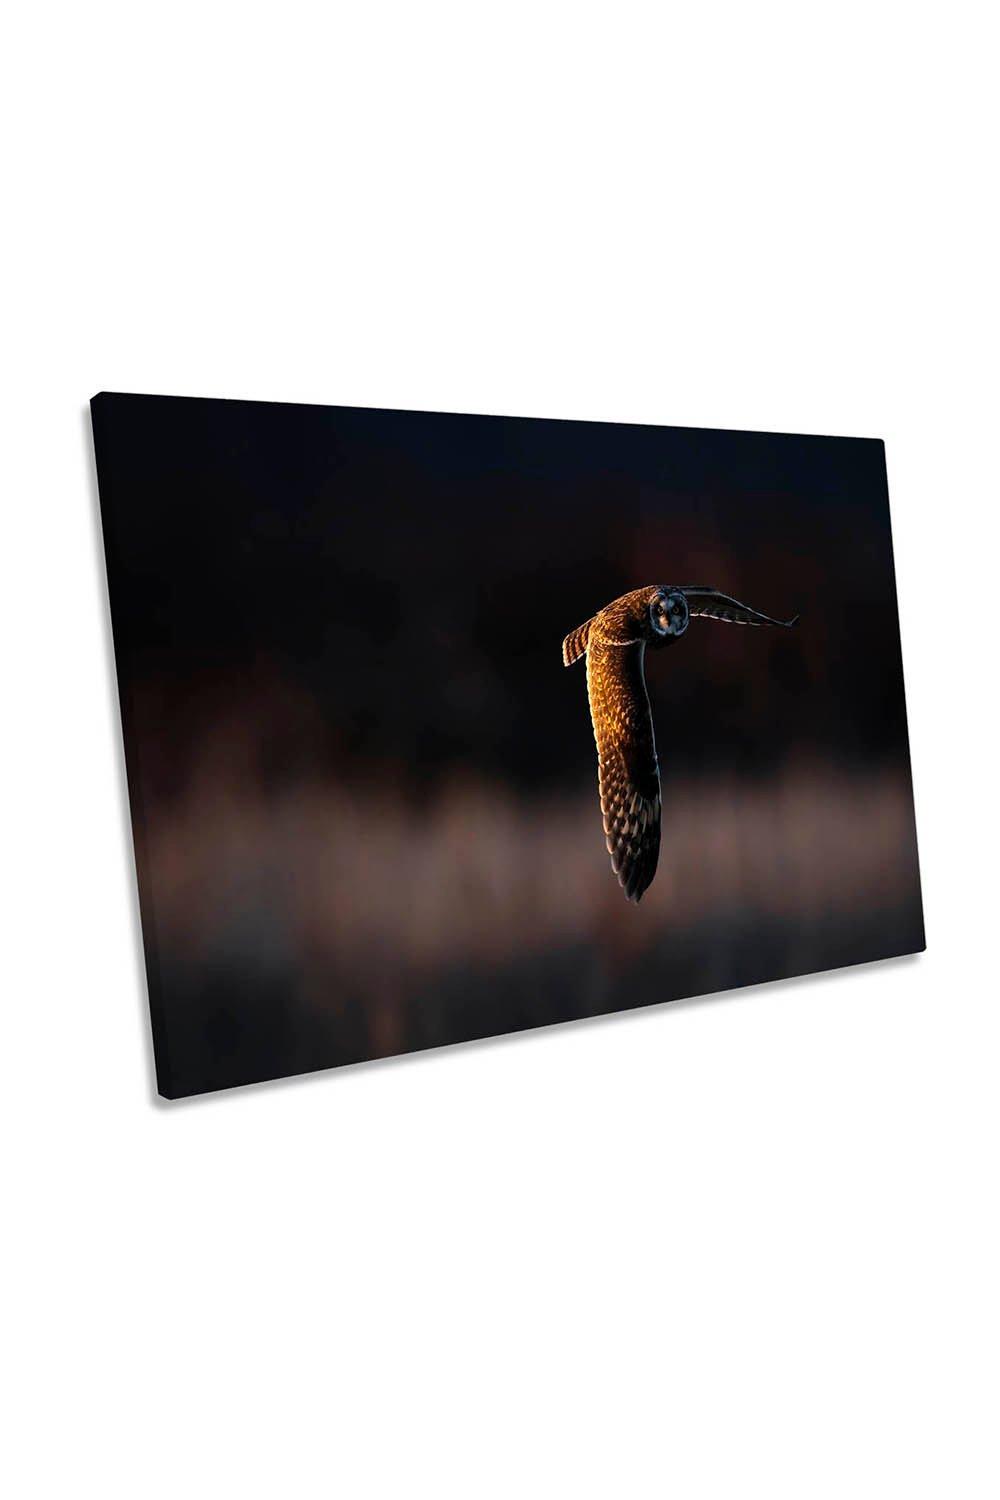 Facing Each Other Owl Bird Wildlife Canvas Wall Art Picture Print